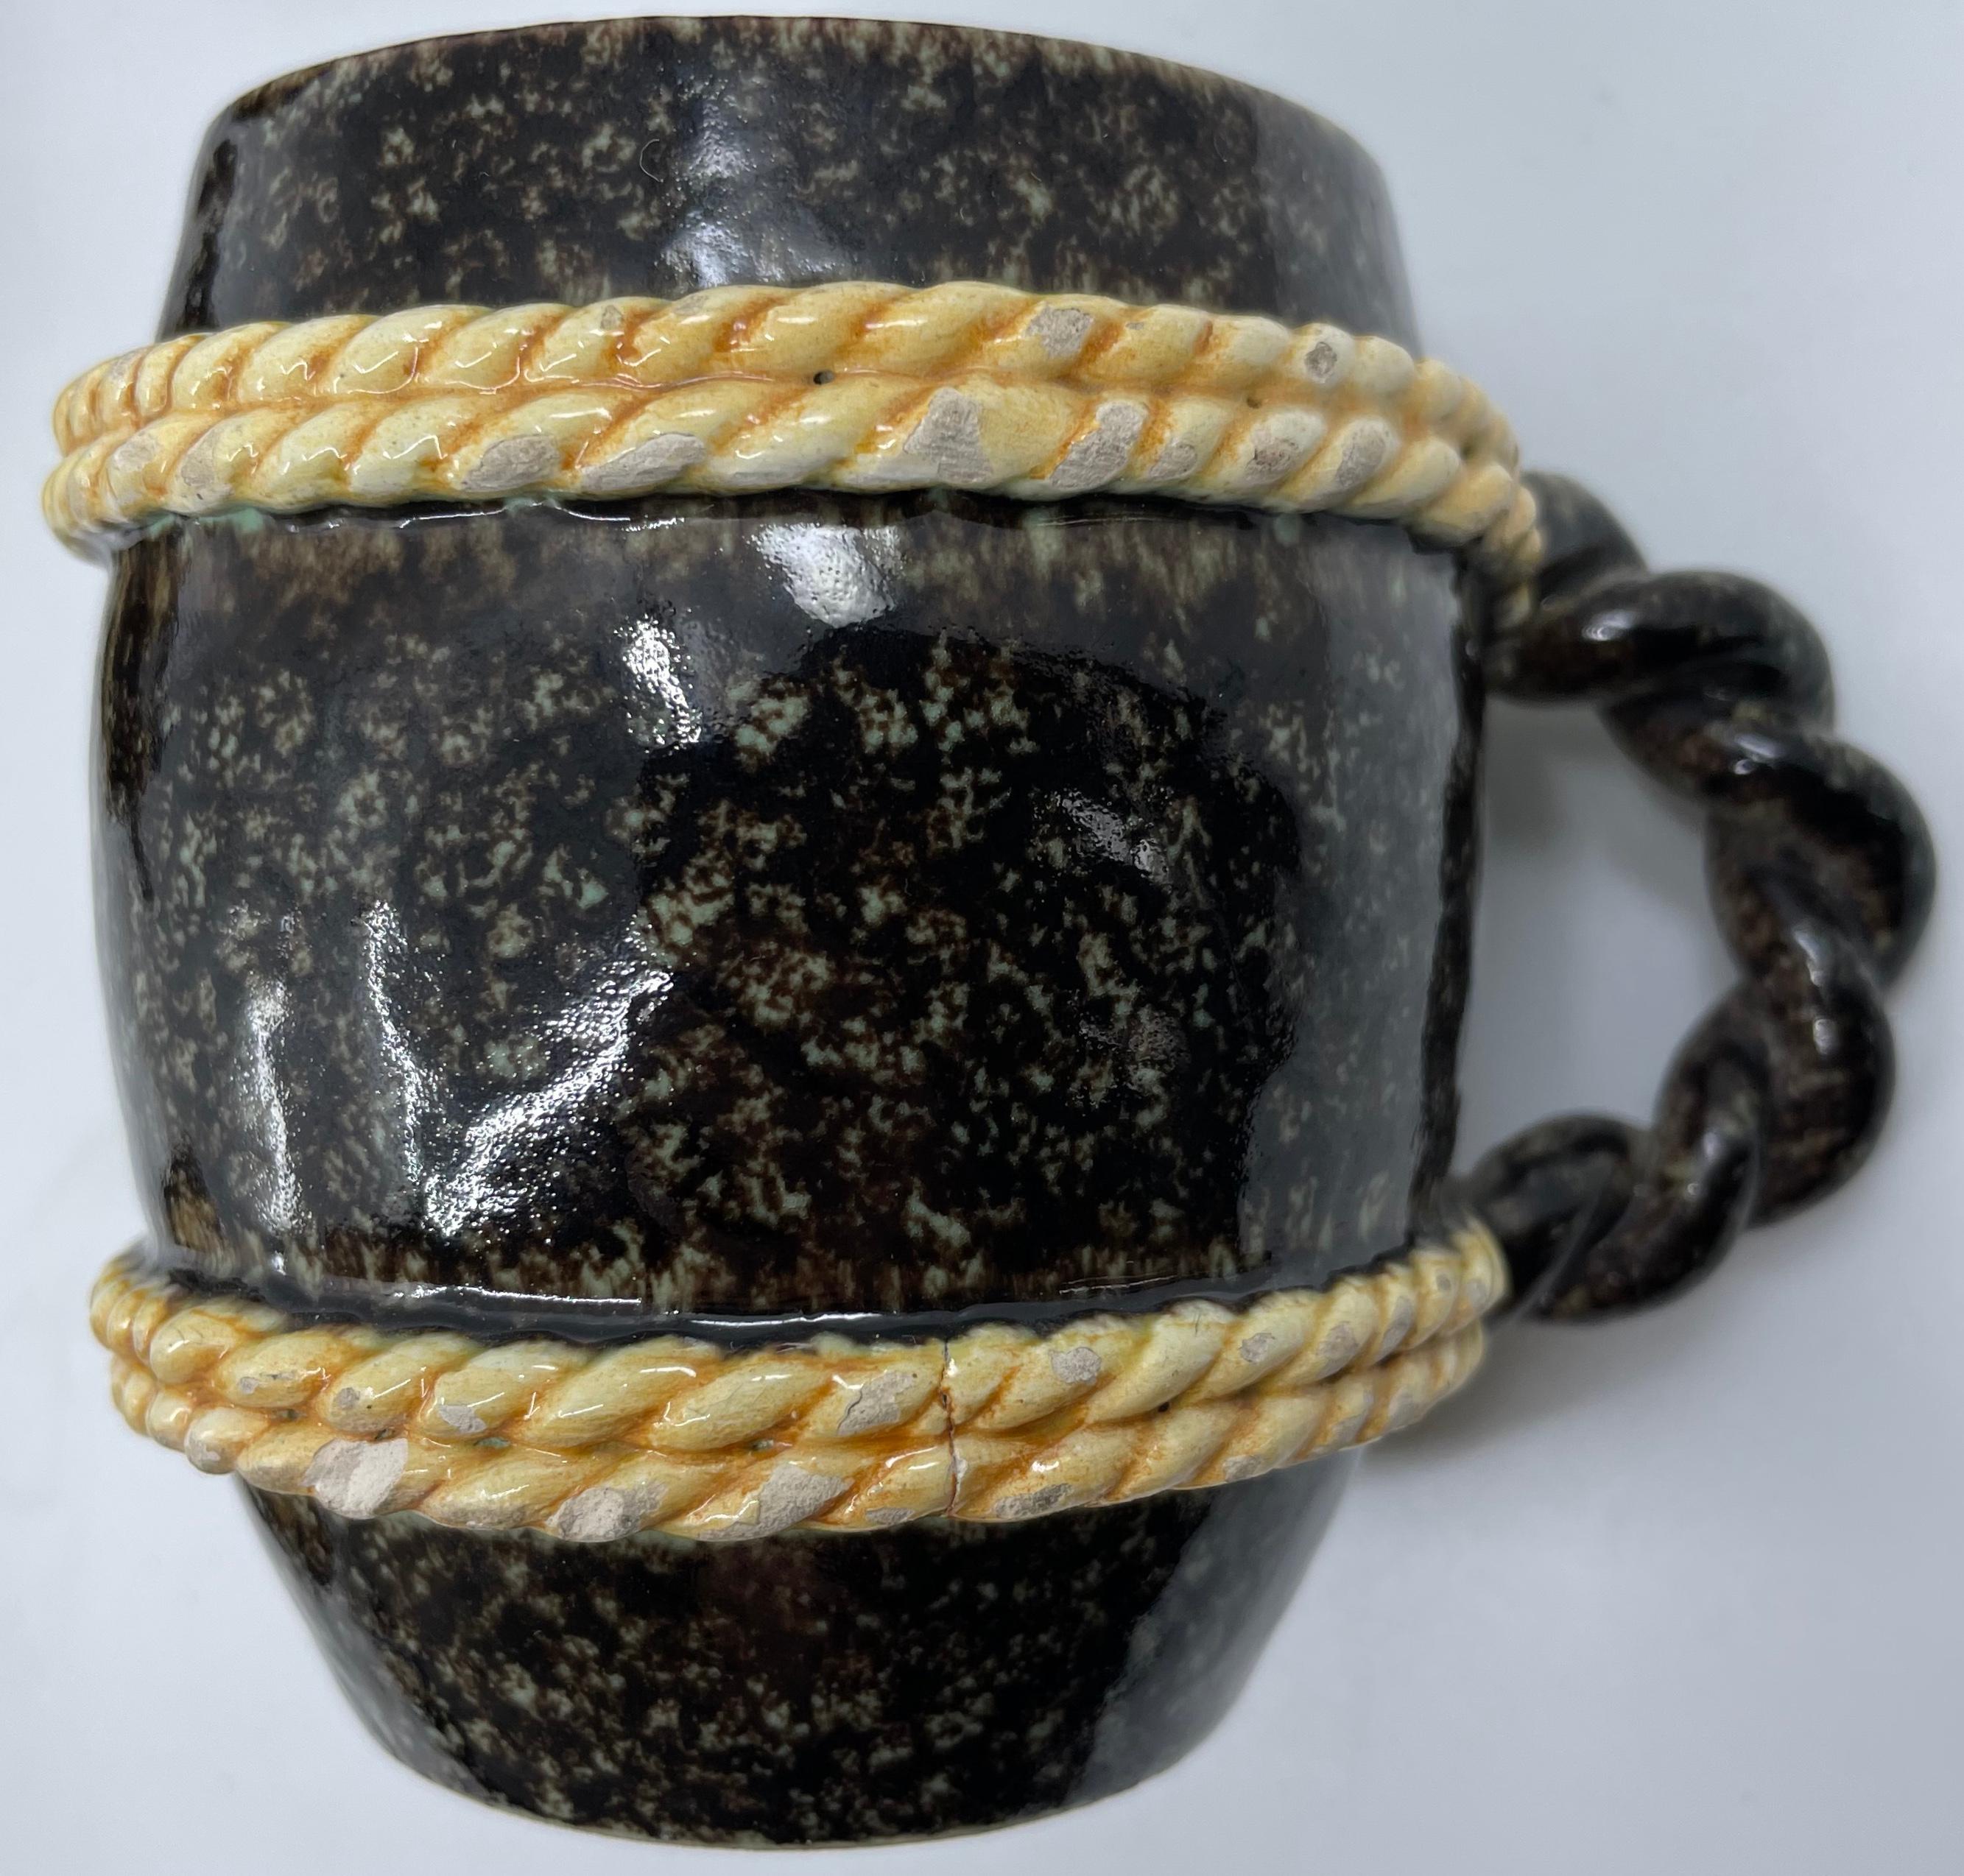 Set of six faux porphyry mugs. Six unique hand cast majolica nautical cups/mugs in faux porphyry glaze with celadon blue interior wash and contrasting “rope” trim. Markings for Caltagirone. Italy, late 19th century.
Dimensions: 3.5